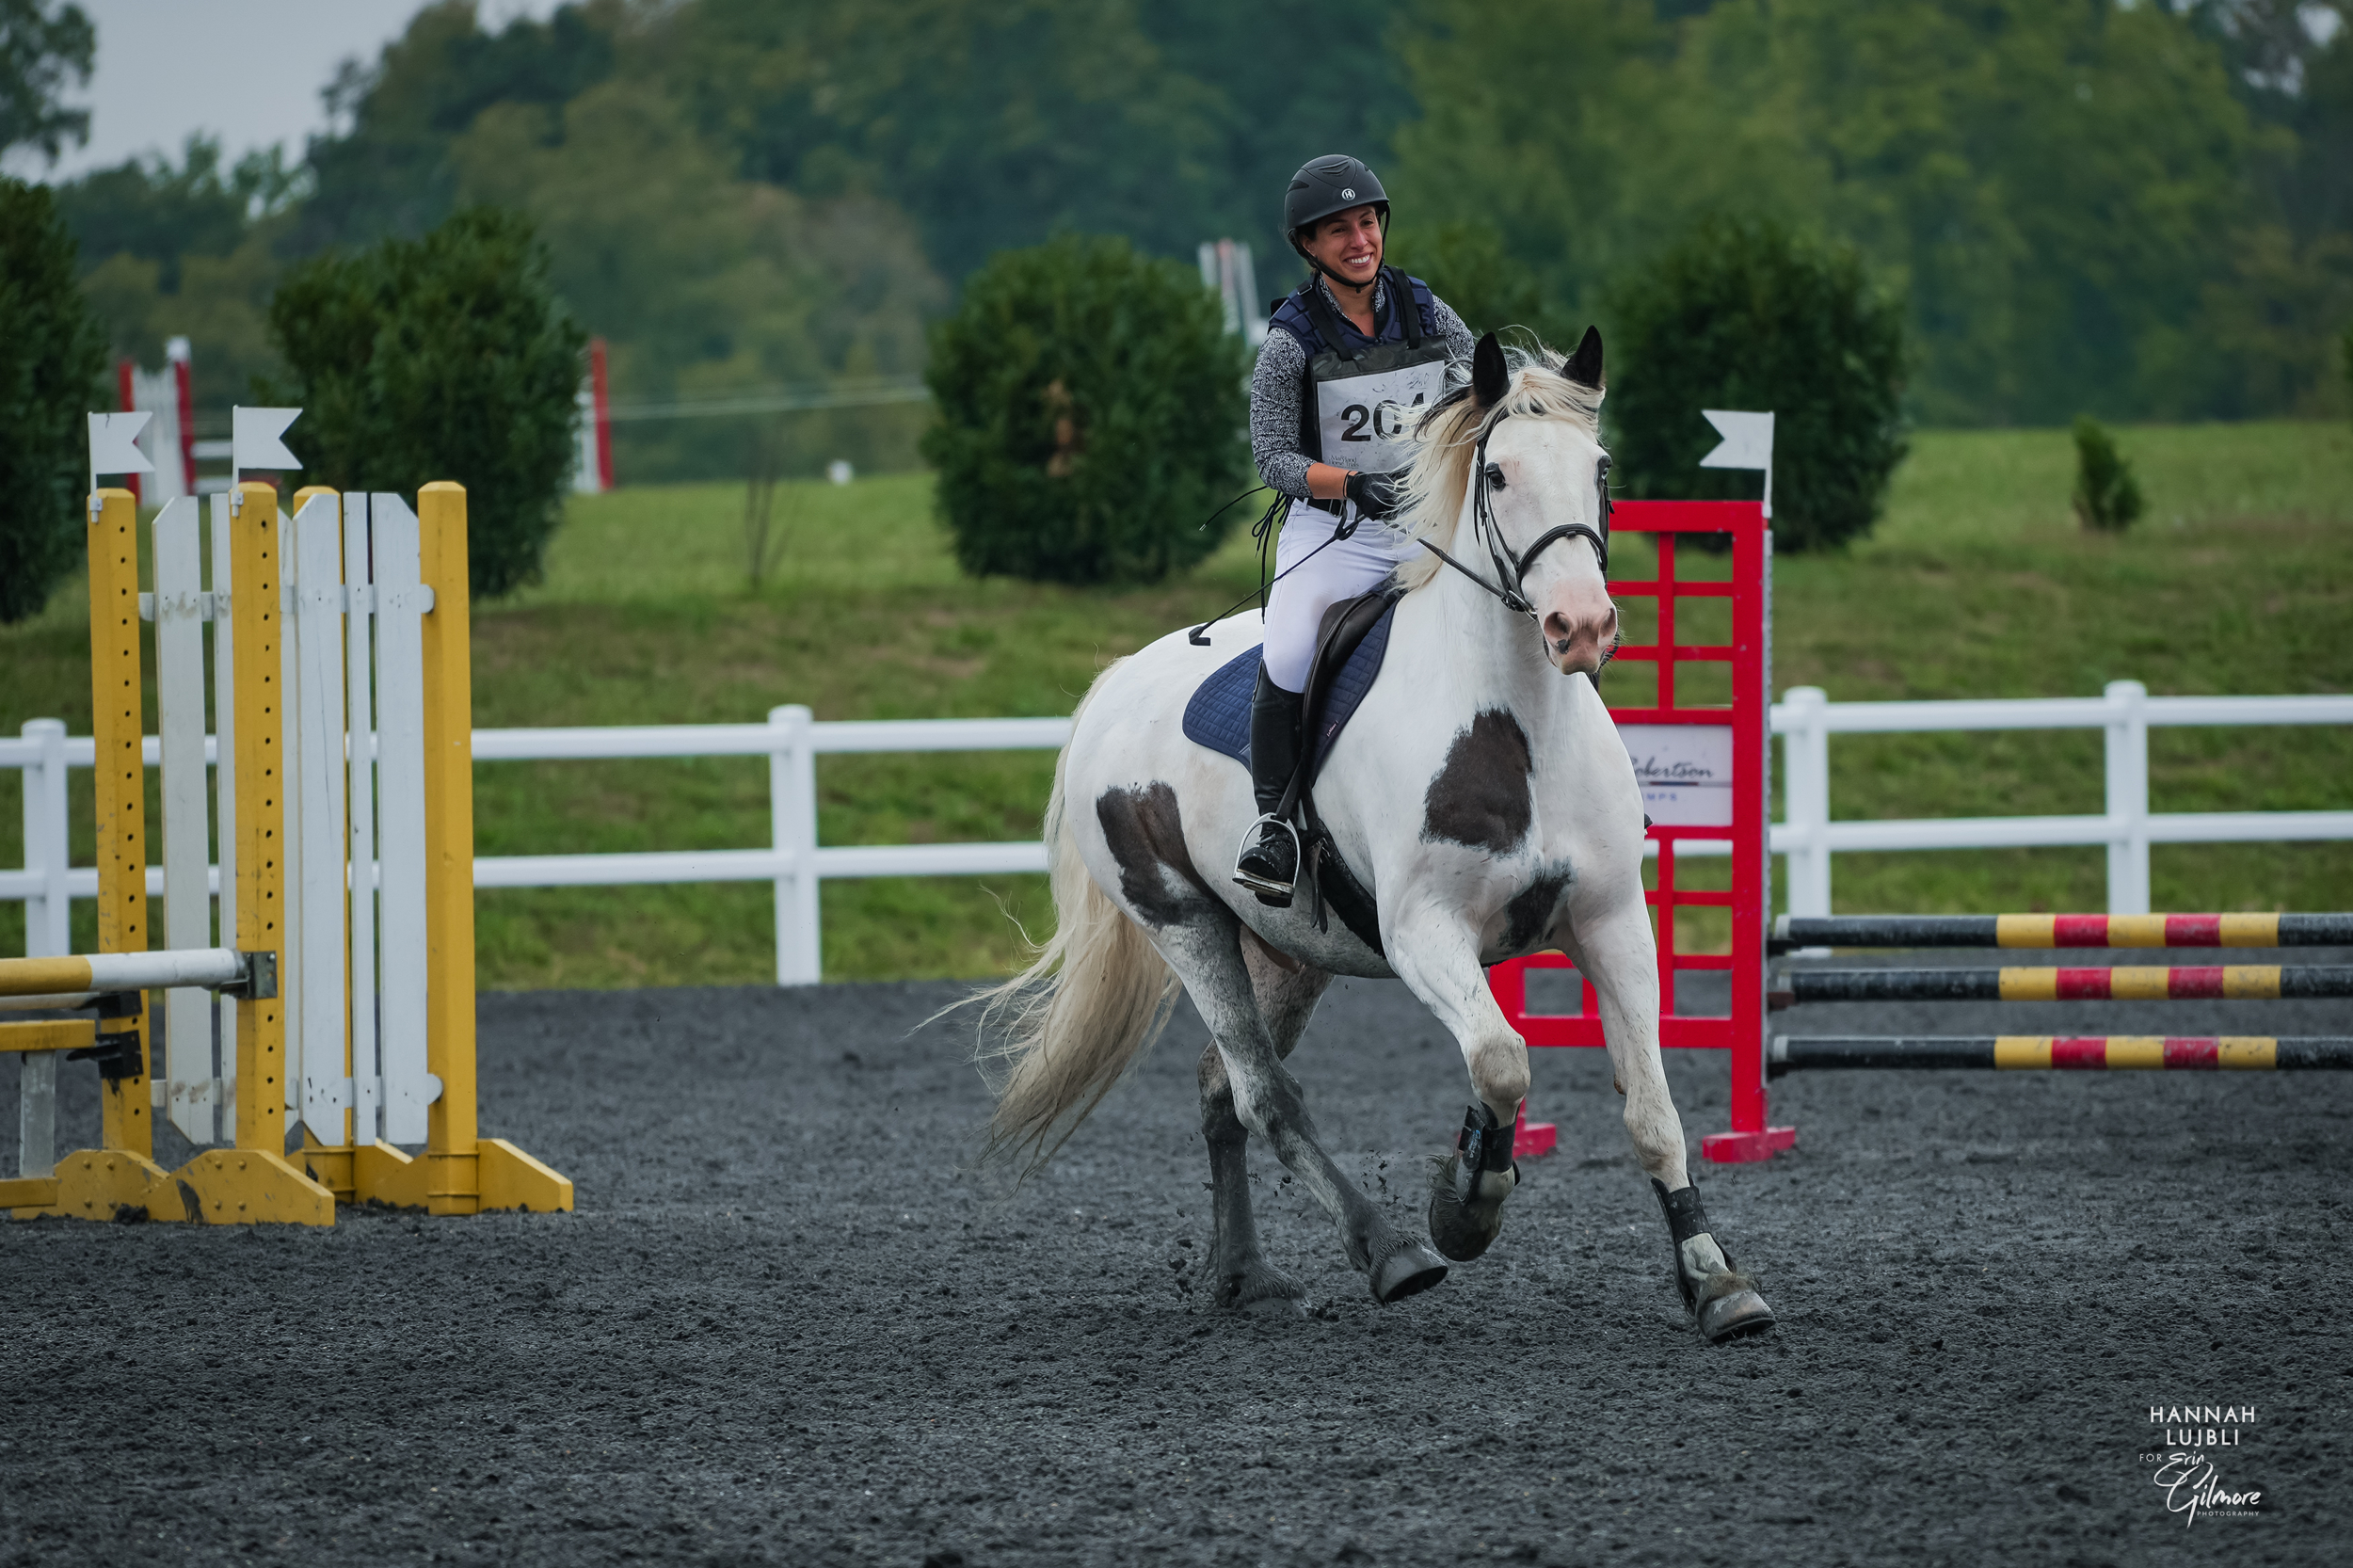 Frankie and smiling rider compete at an event